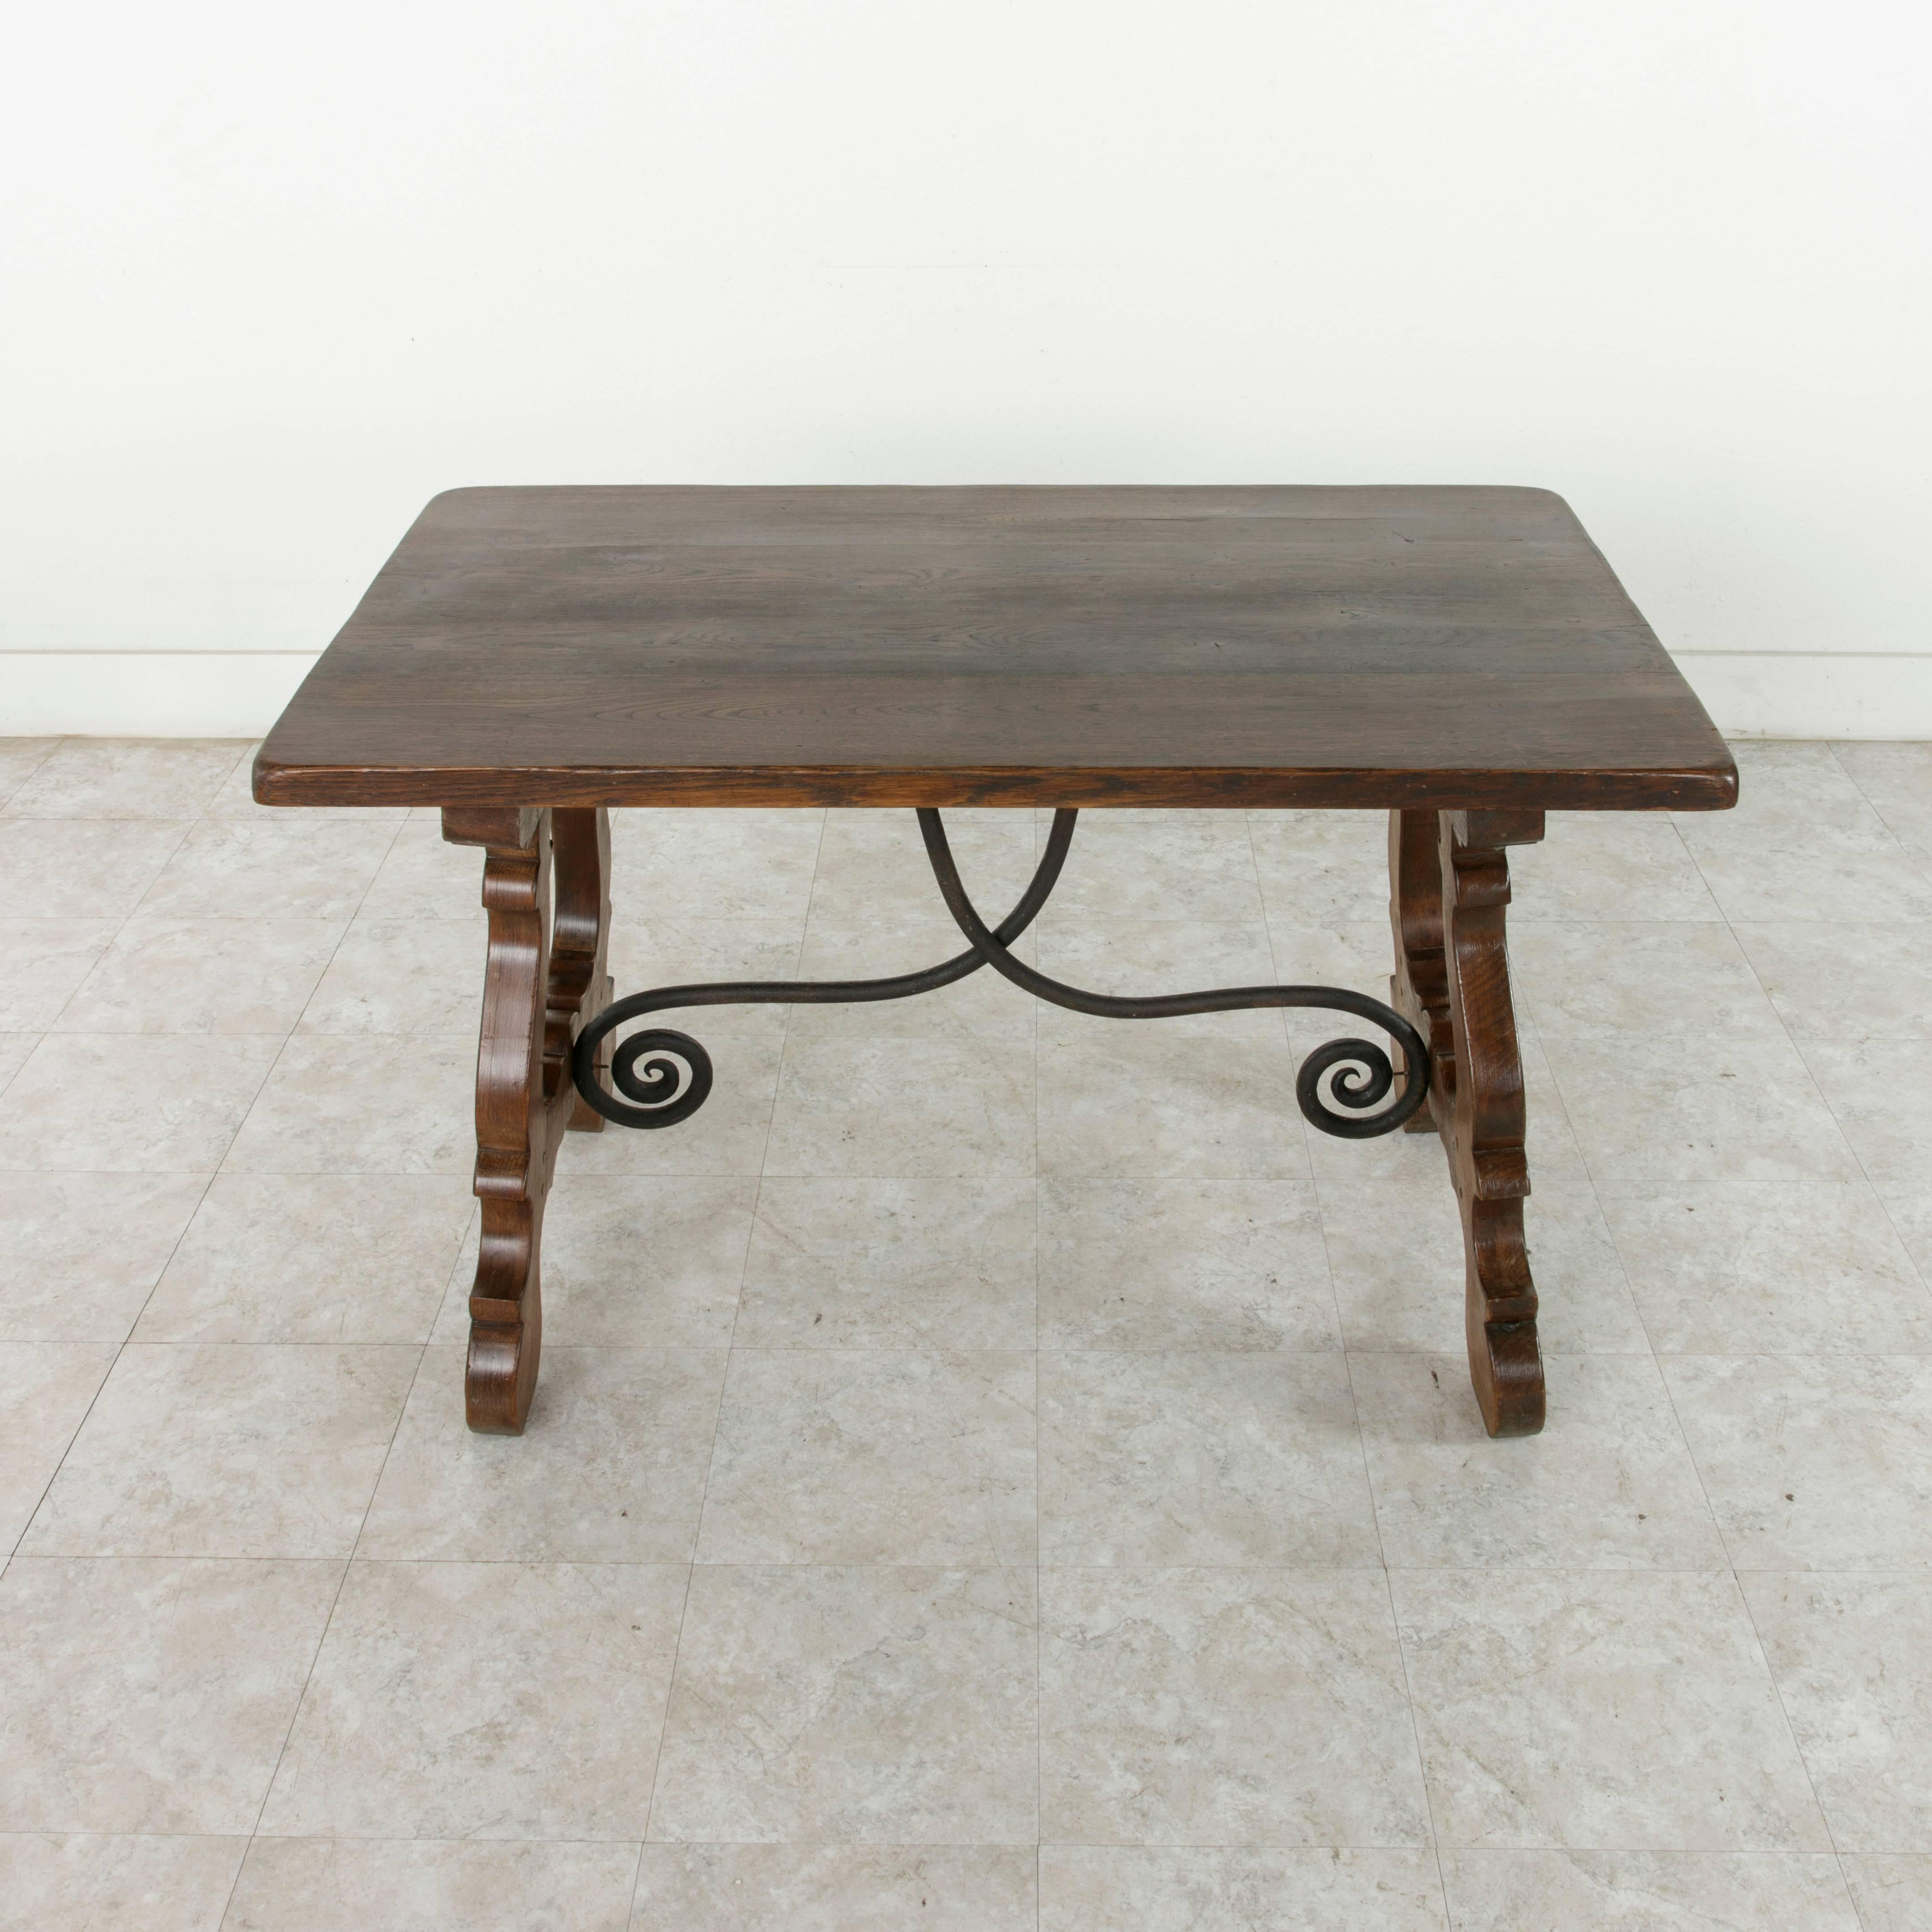 Found in Le Mans, France, this oak Spanish Renaissance style table features two gracefully carved legs joined by a hand forged iron stretcher finished with iron rosettes.  With a 47 inch length and 29 inch width, it is of an ideal size for a